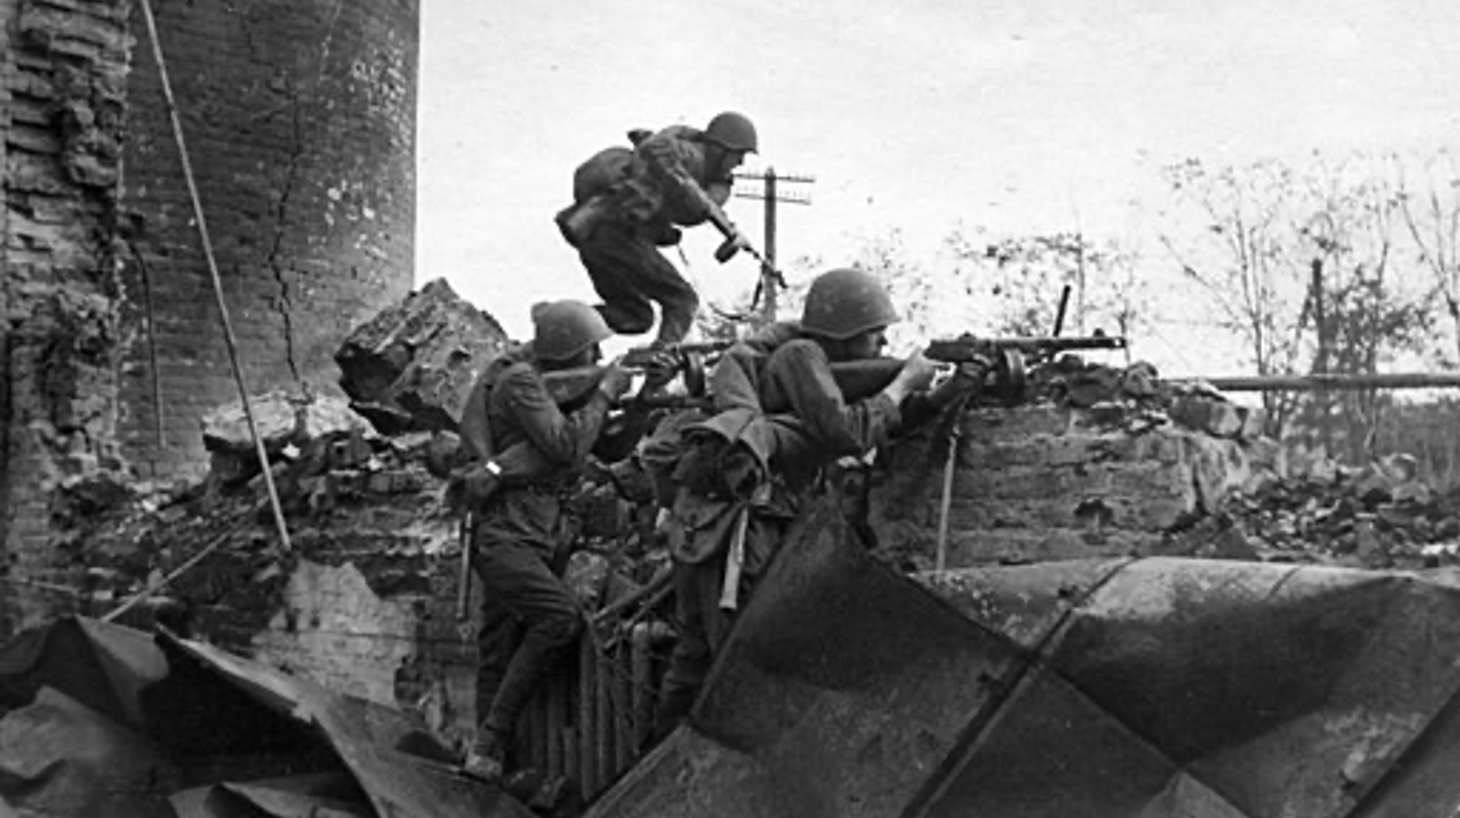 Figure 3: Red Army soldiers use their PPSh-41s during the Battle of Stalingrad, November 1942. Source: Wikipedia Commons